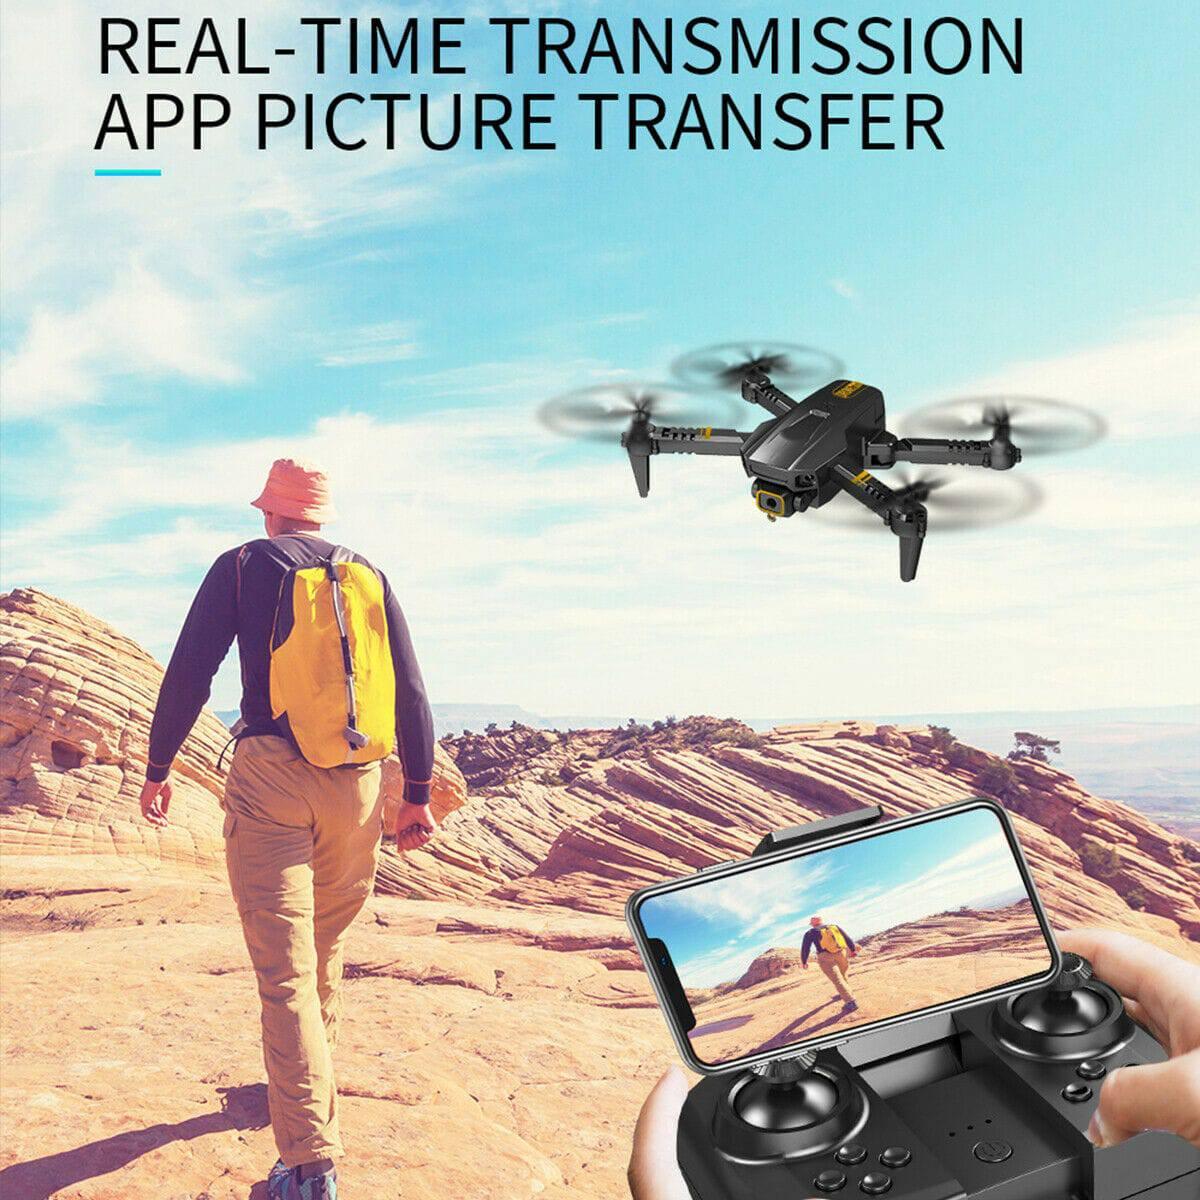 Foldable MIni Drone X Pro 5G WIFI FPV Aerial 4K HD Camera Selfie Quadcopter Gift - The Remote Factory